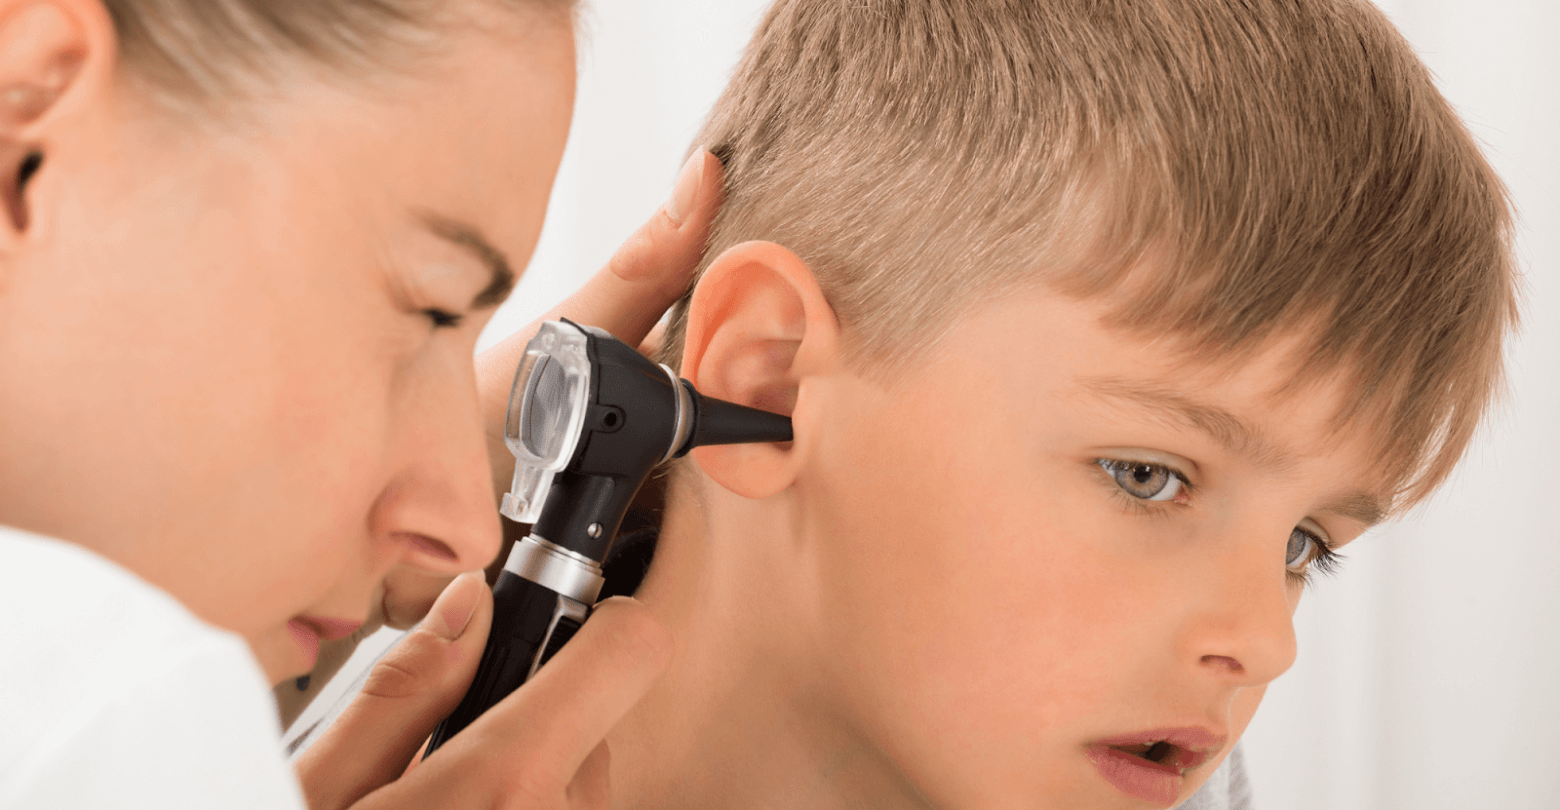 How to Tell if Your Child Has an Ear Infection